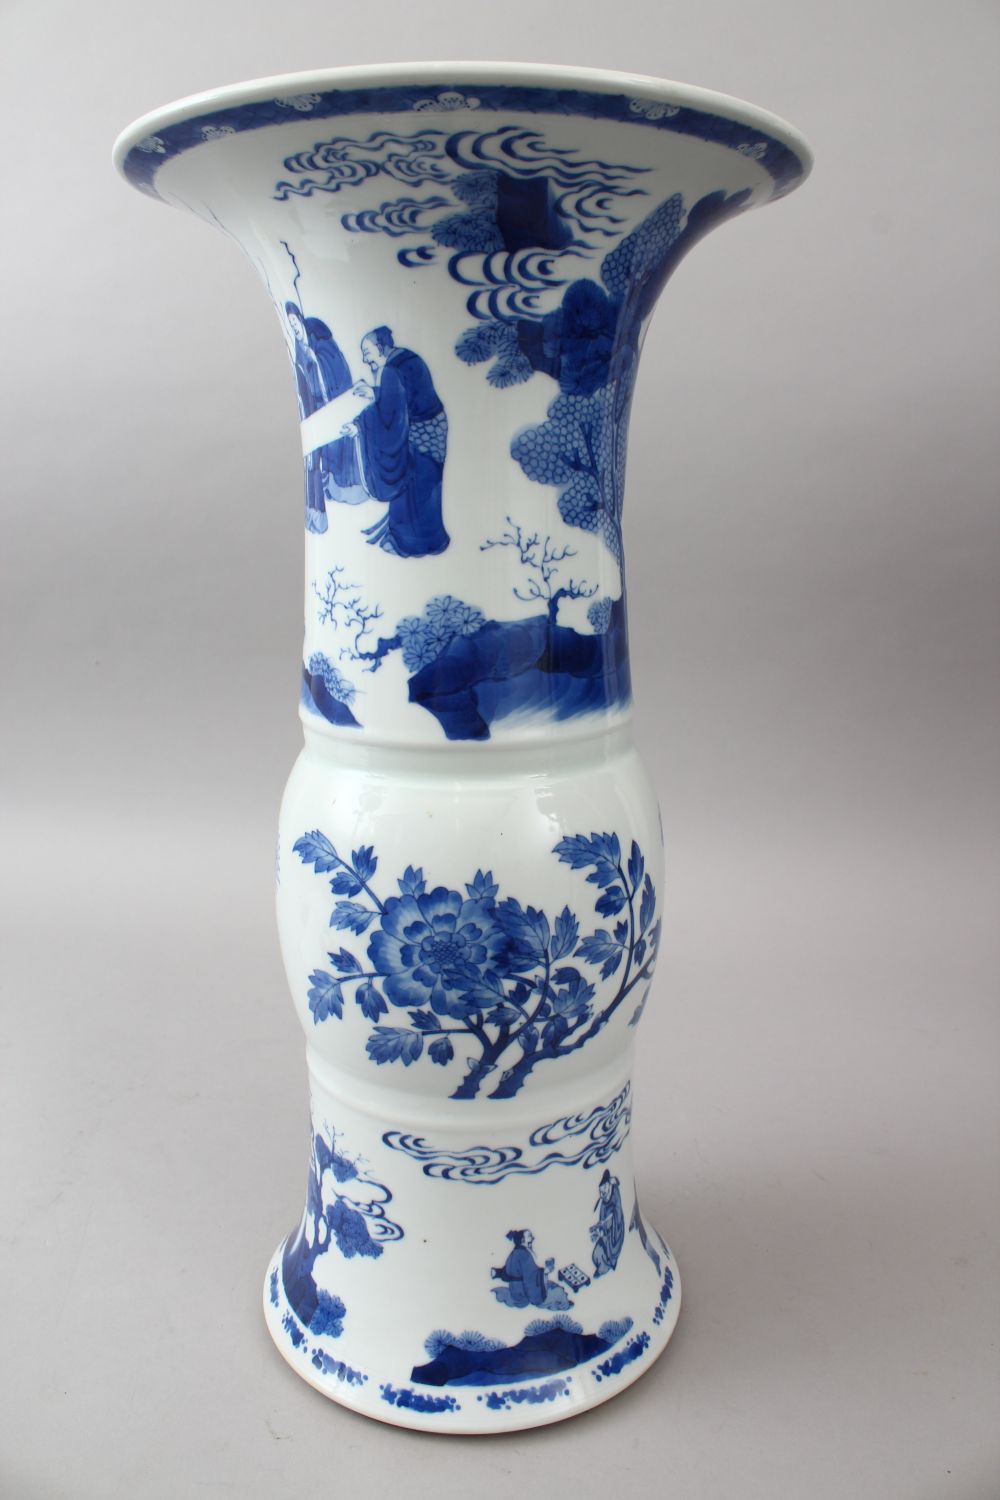 A LARGE CHINESE BLUE & WHITE PORCELAIN YEN YEN VASE, the body of the vase decorated with scenes of - Image 2 of 7